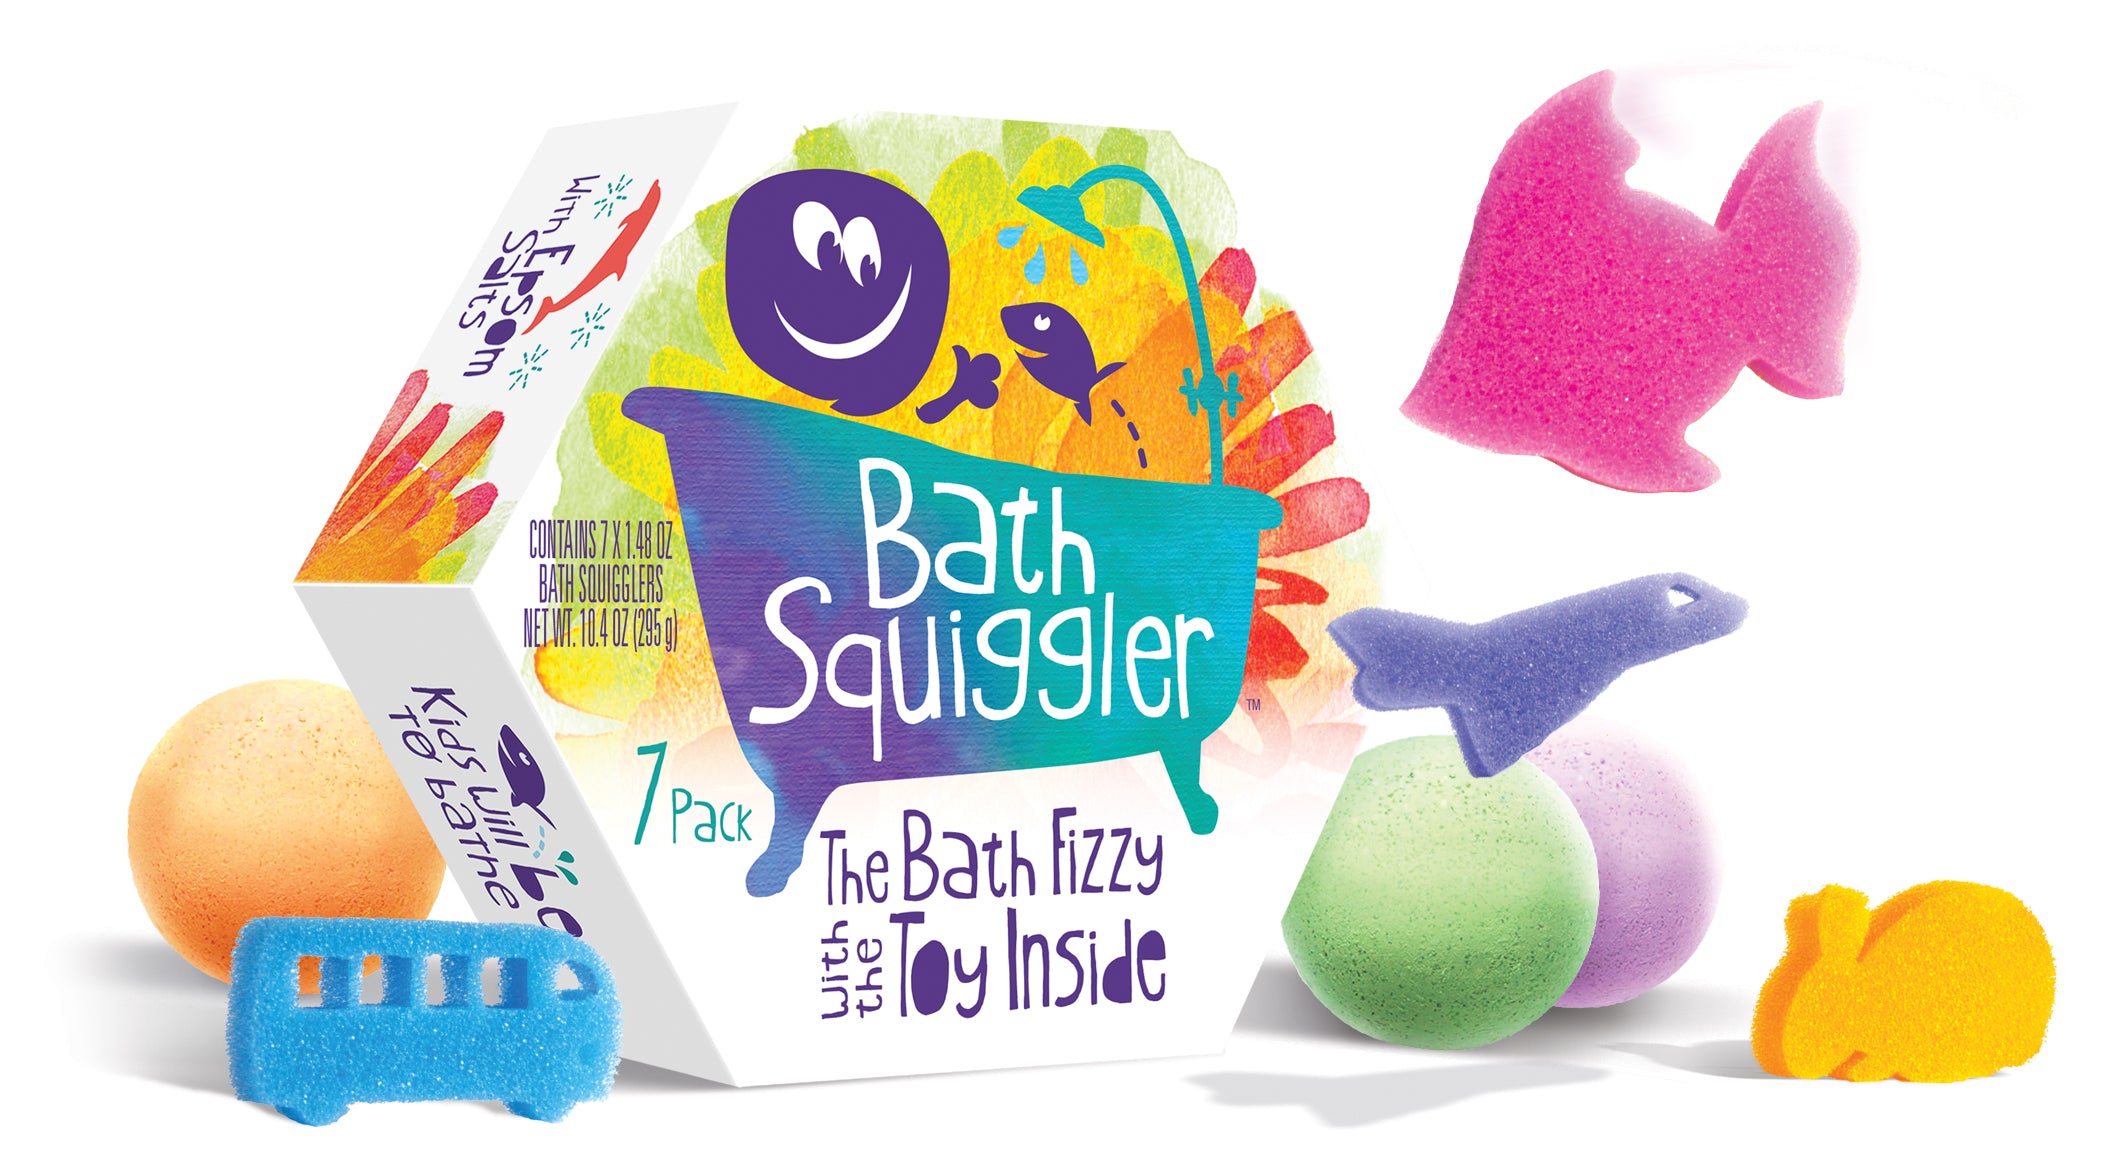 Bath Squiggler Packaging with sponge toys and bath bombs around of the package